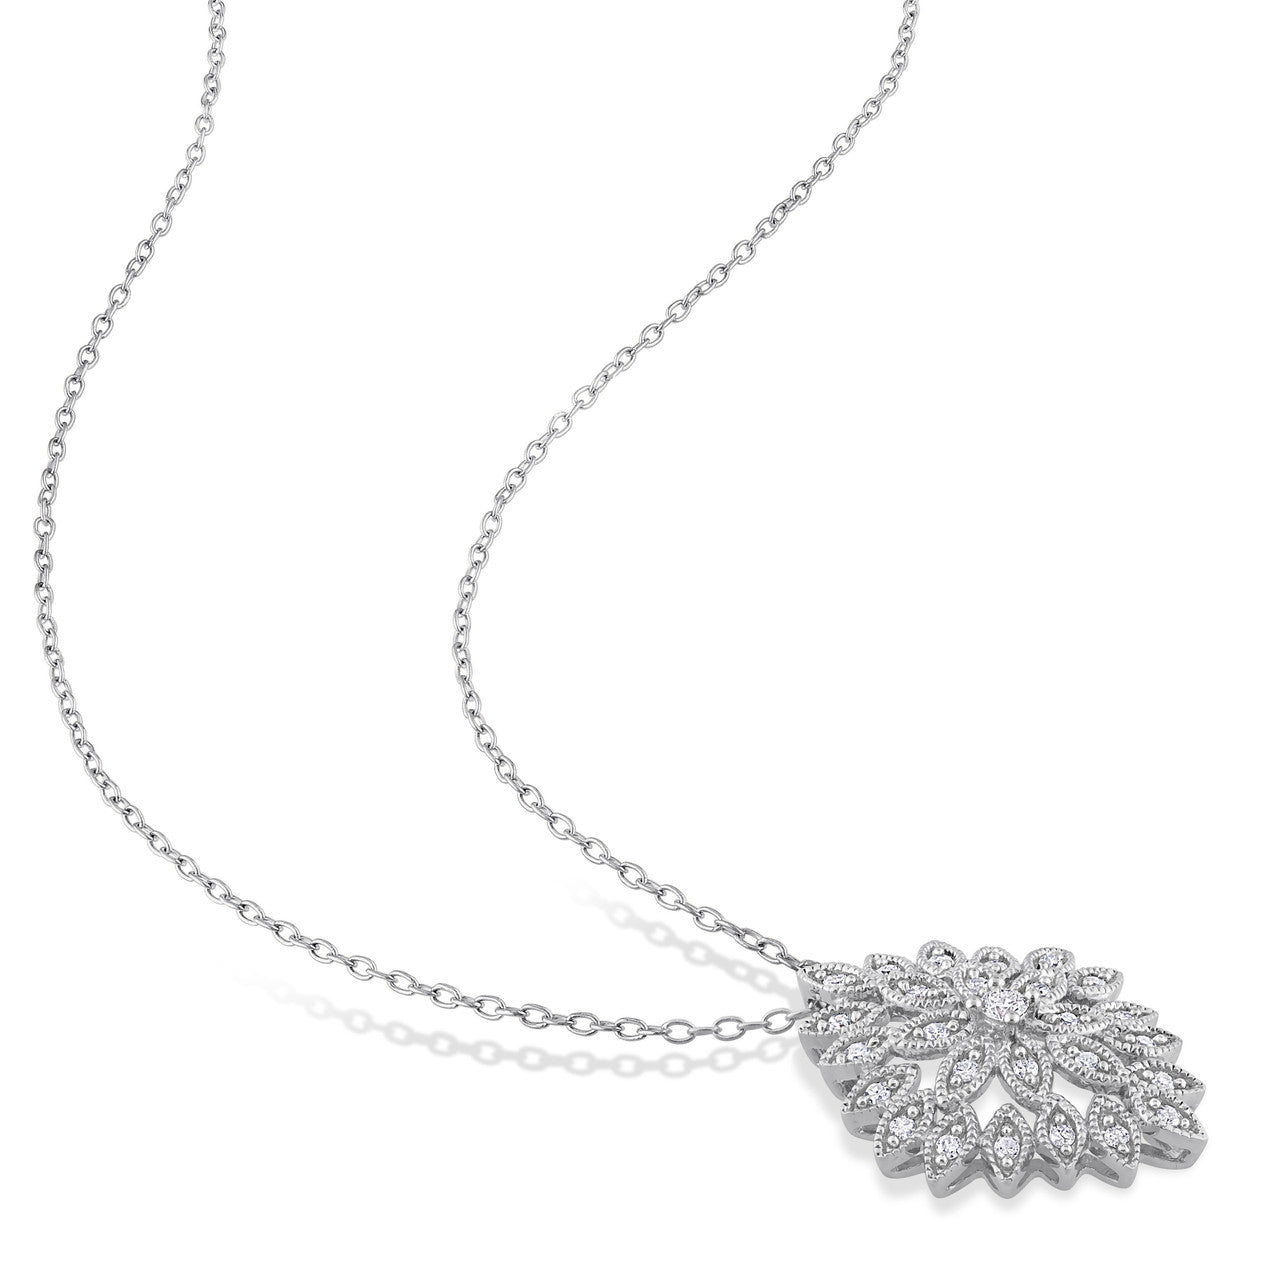 Ice Jewellery 1/2 CT Diamond Flower Earrings And Pendant With Chain in Sterling Silver - 75000005725 | Ice Jewellery Australia